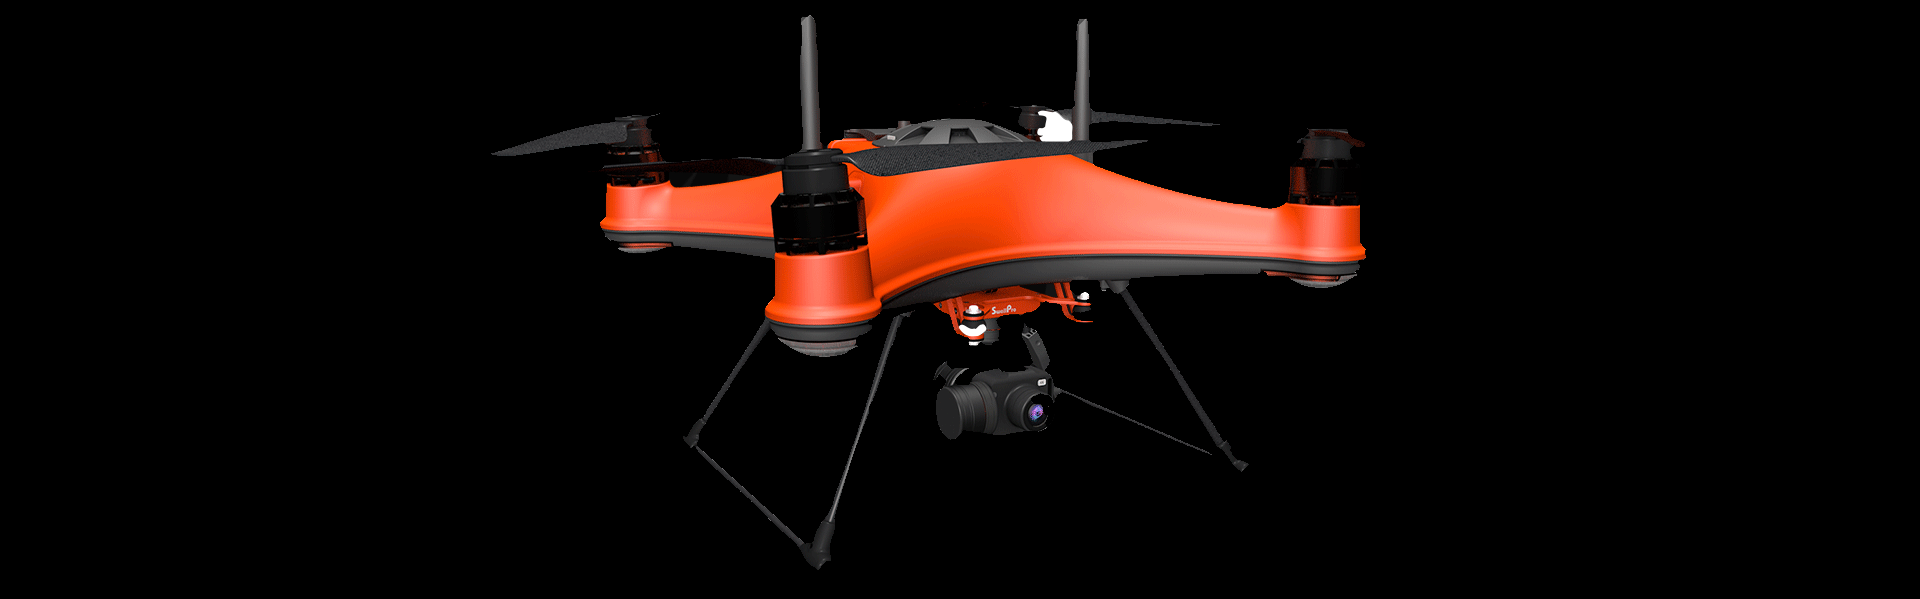 https://swellpro.gr/wp-content/uploads/2021/07/A-new-benchmark-for-waterproof-drones_bg.png